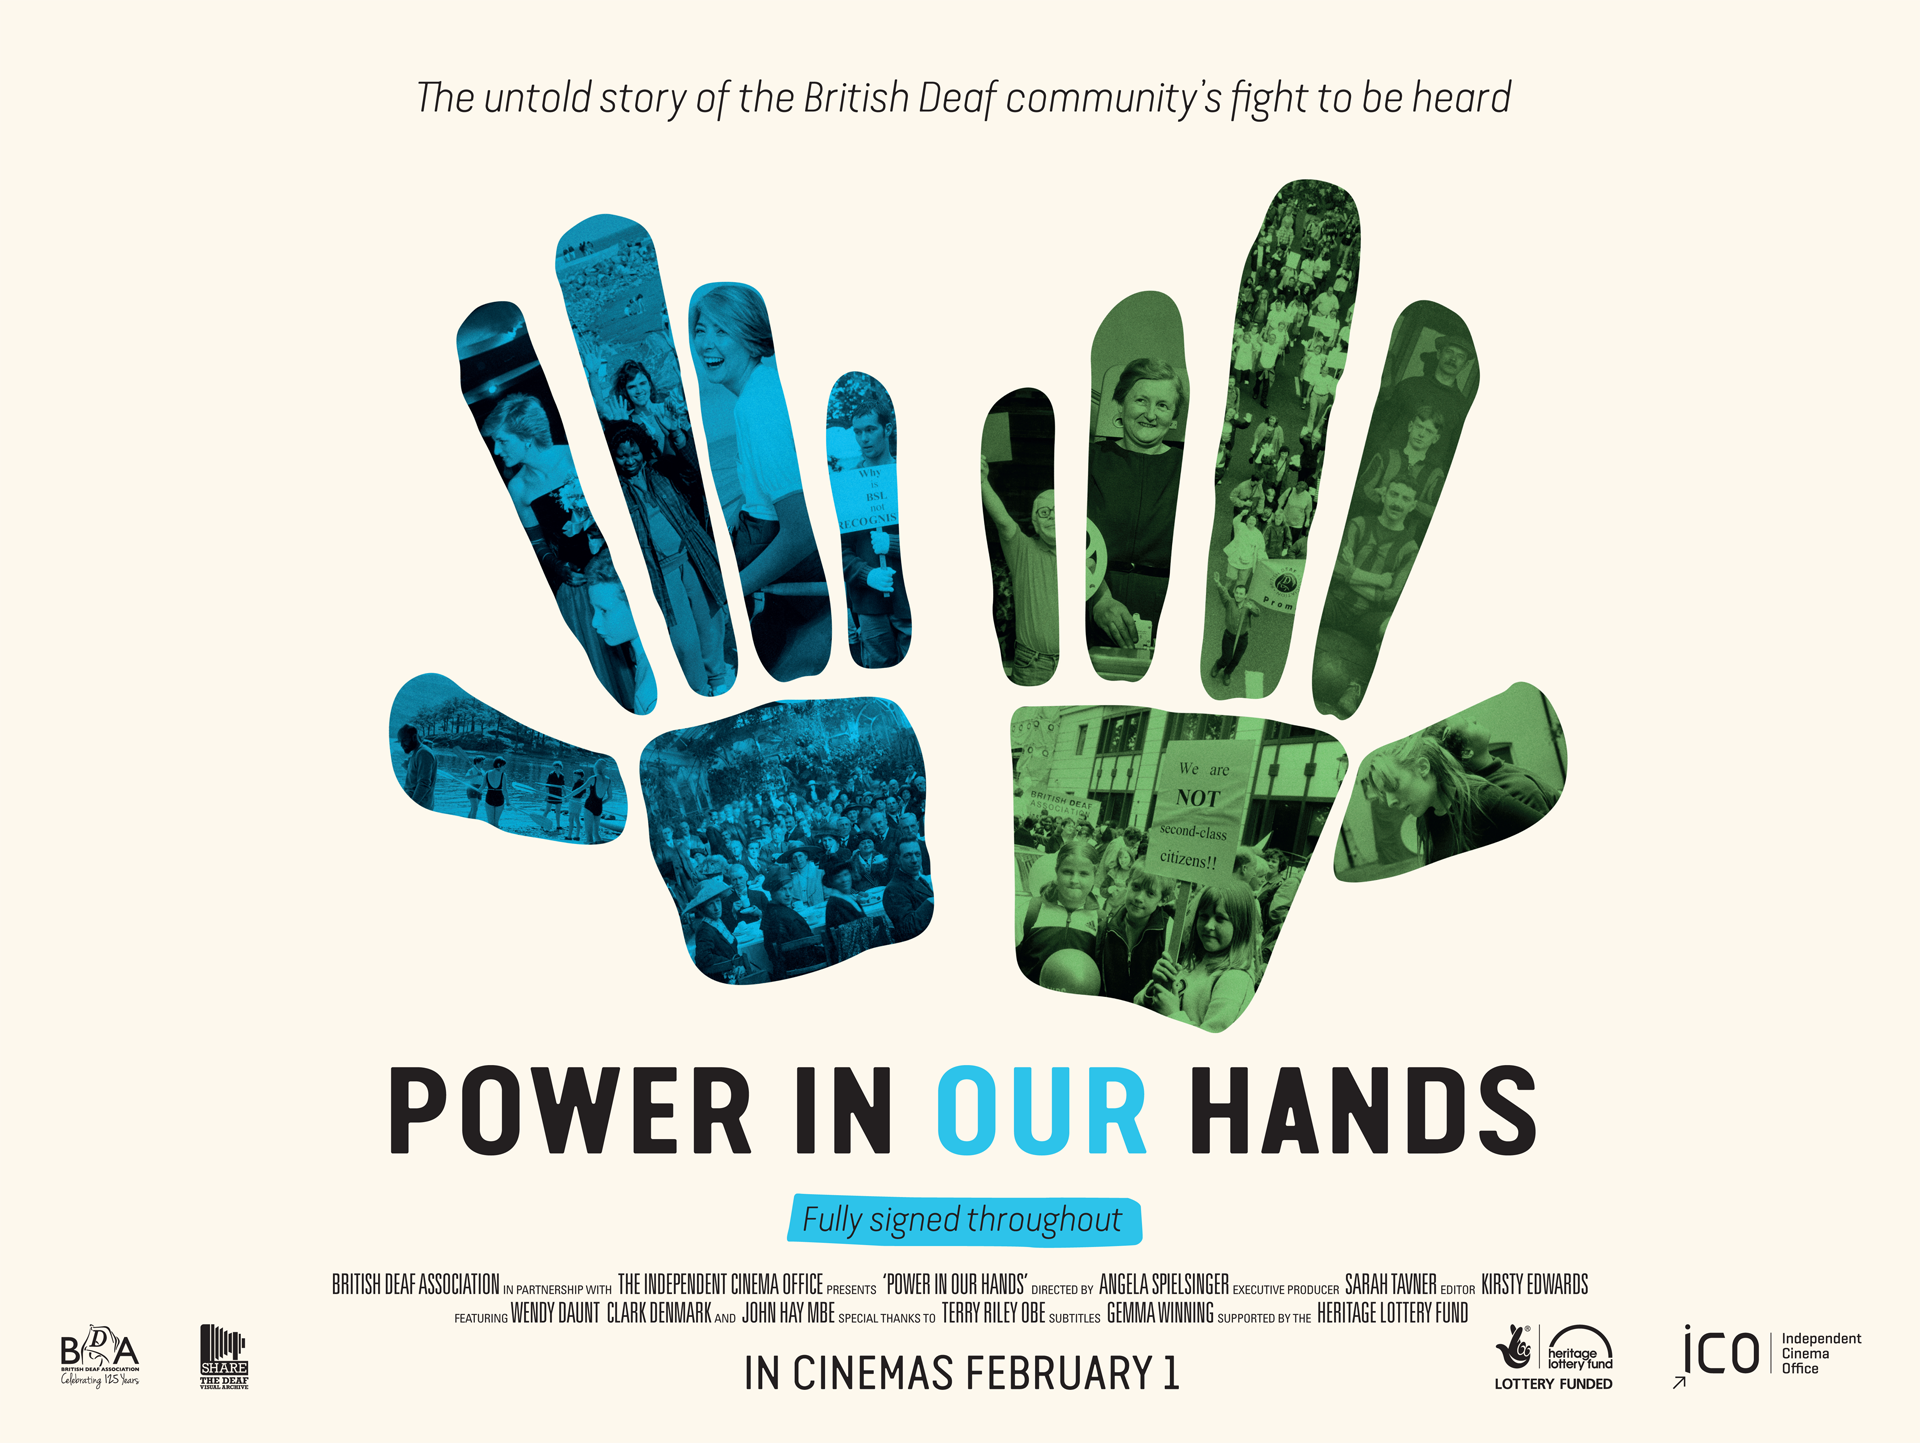 Power in our hands